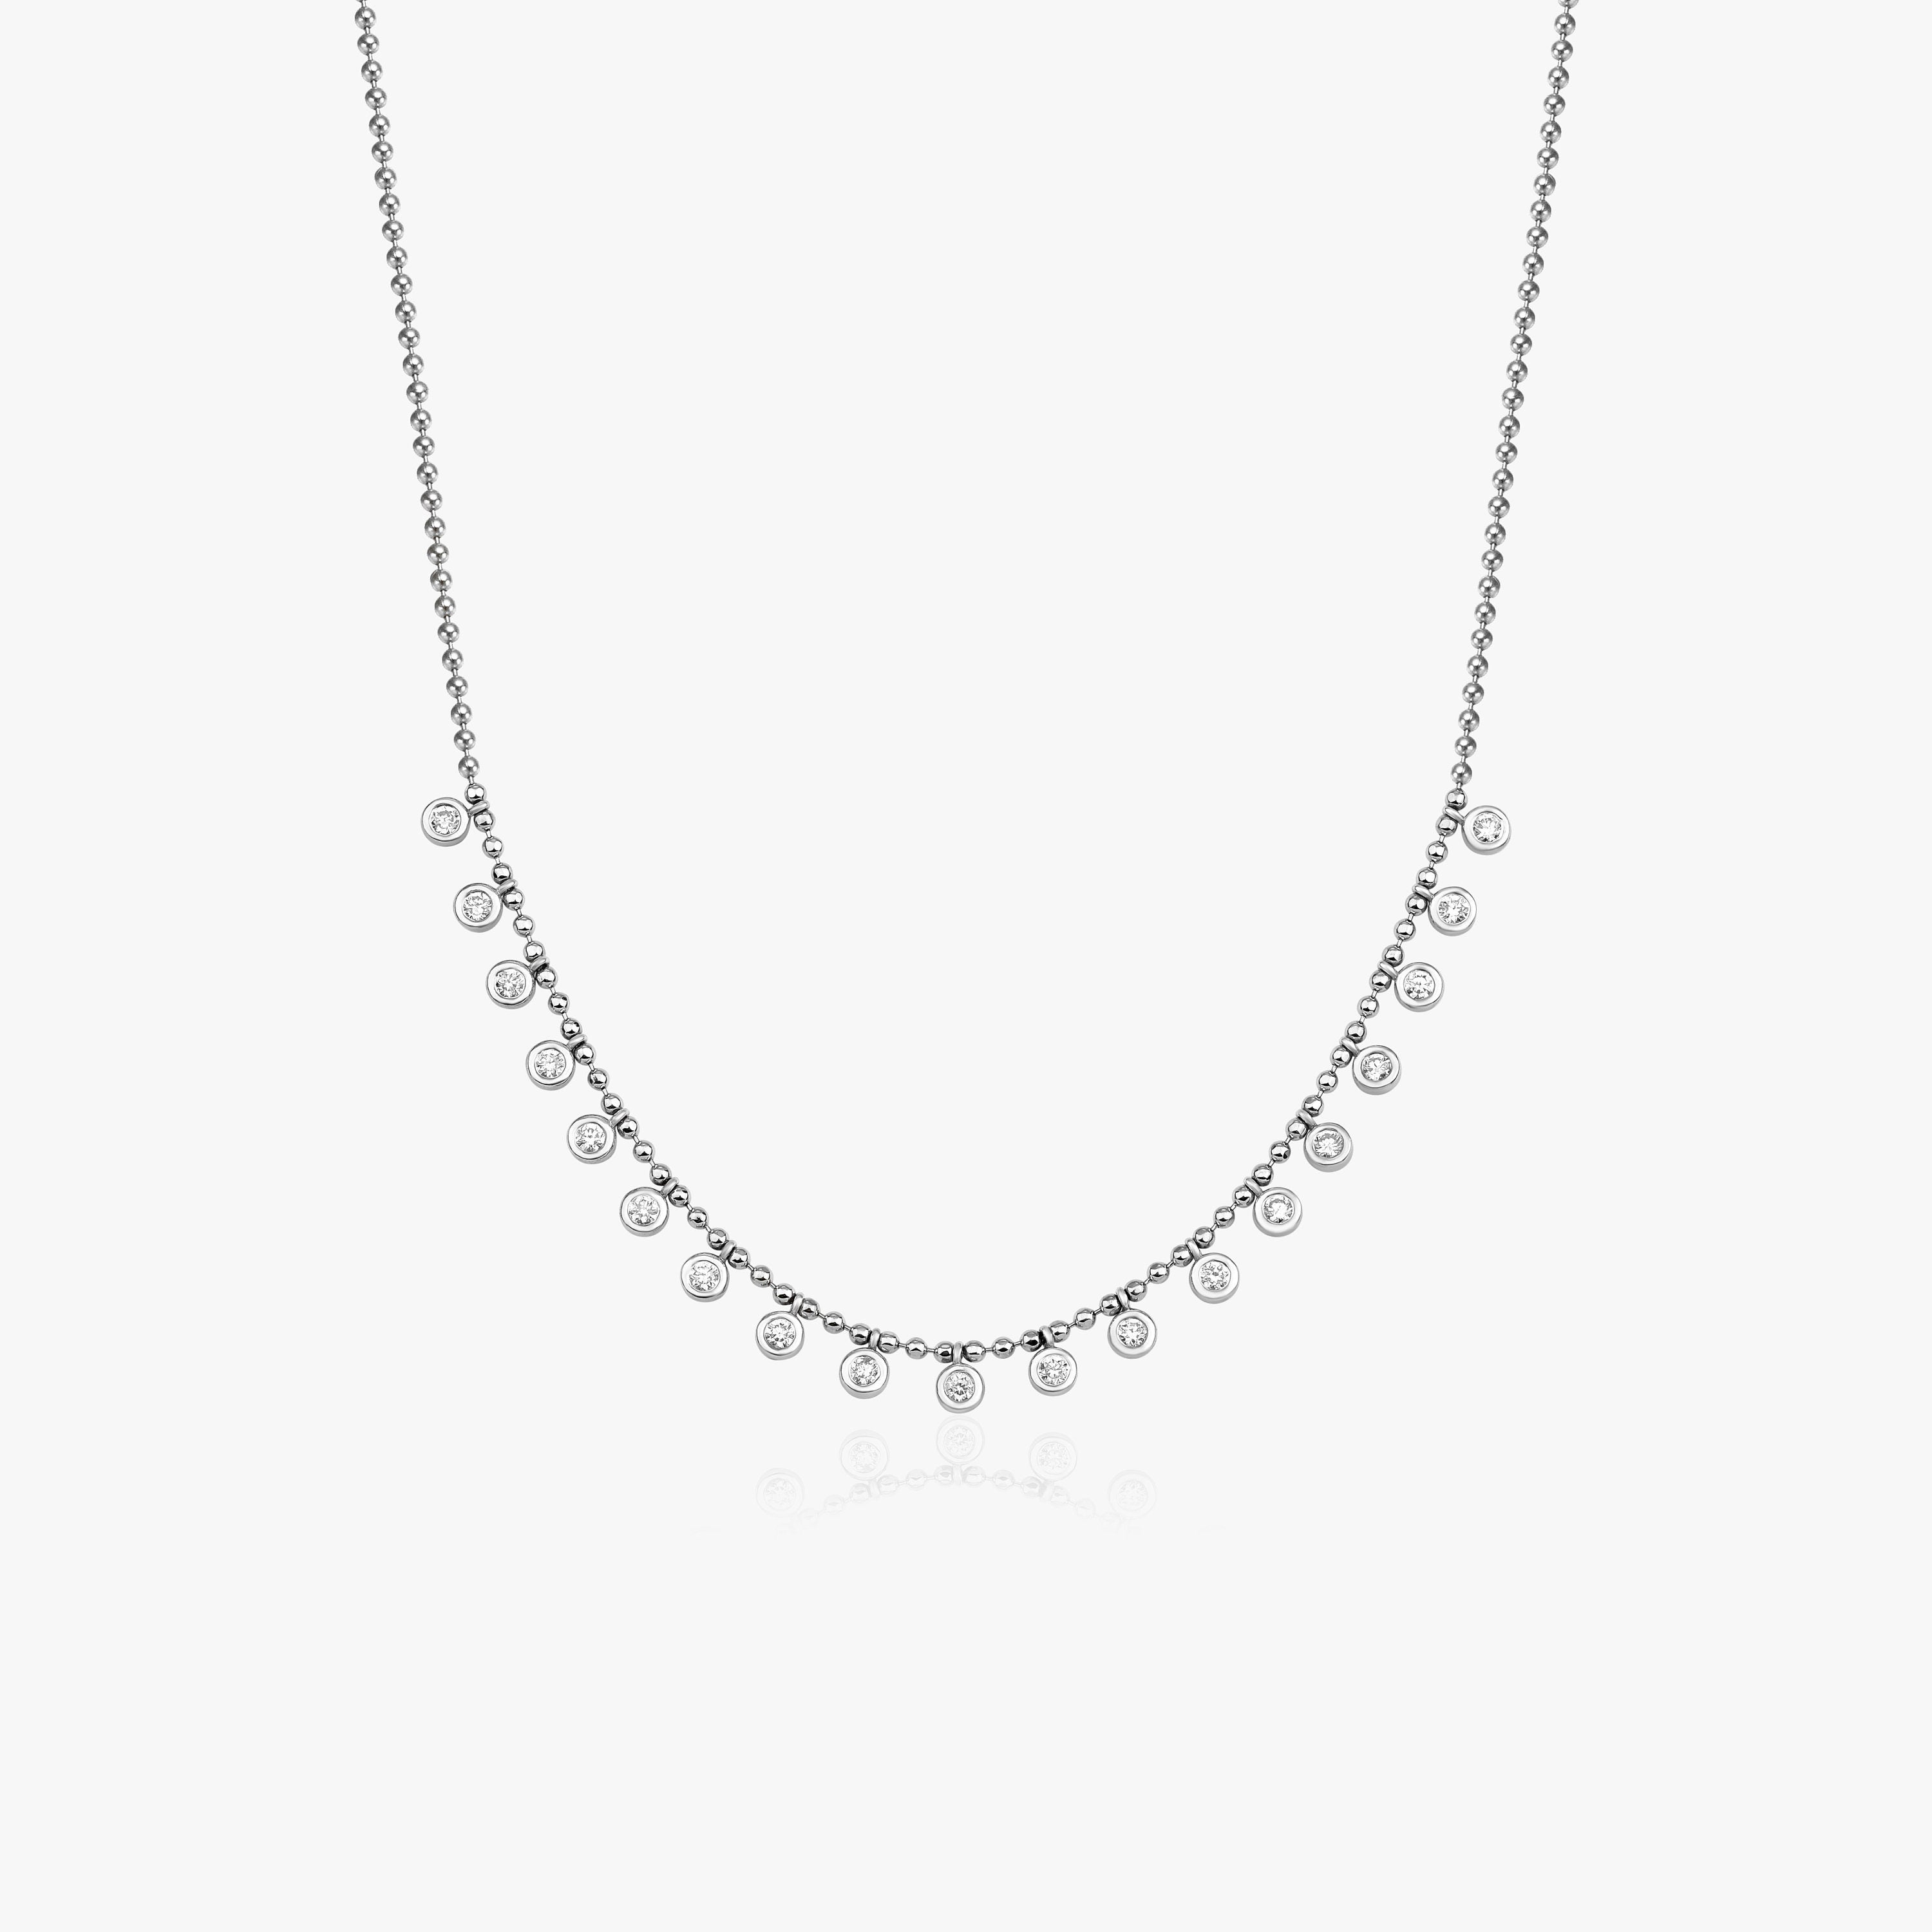 Ball Chain Diamond Necklace in 14K Gold